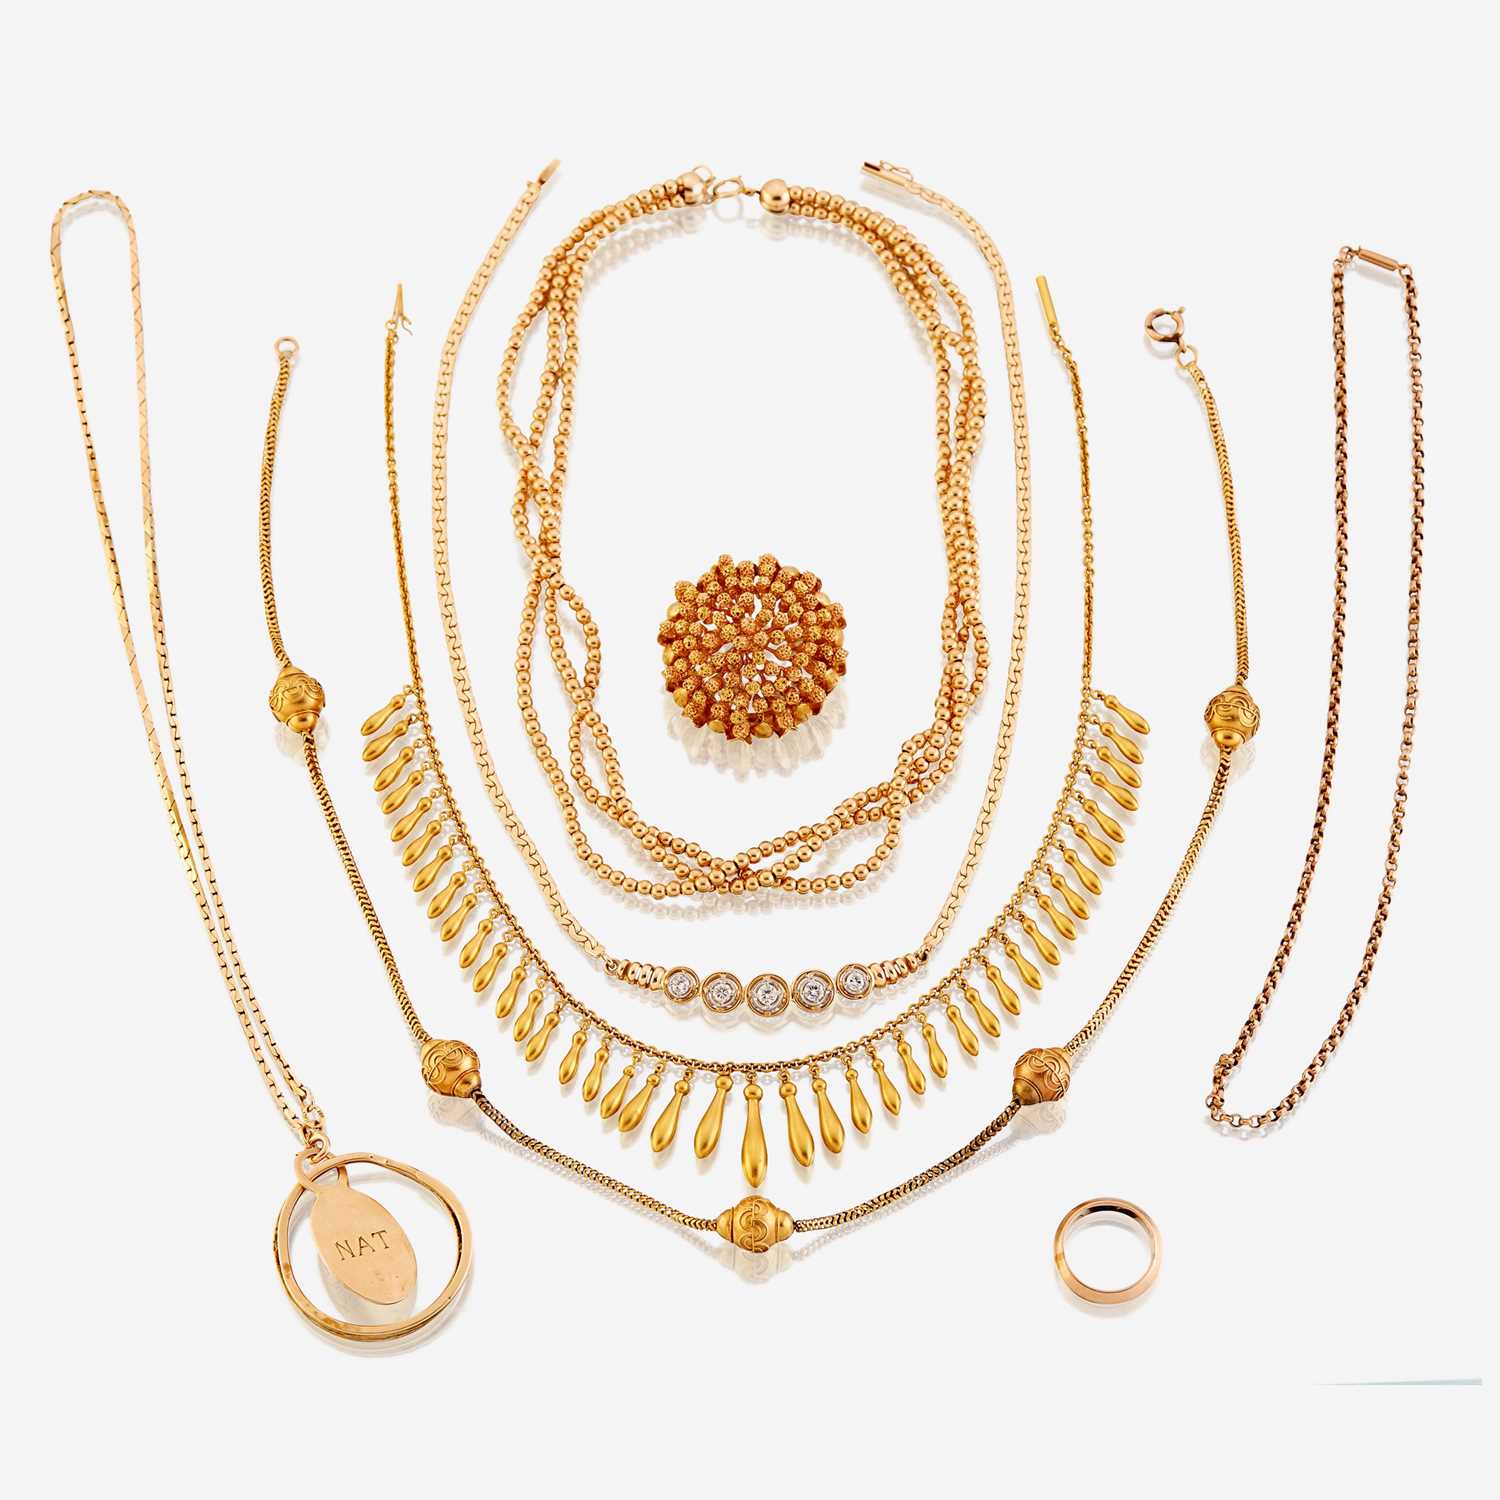 Lot 69 - A collection of eight pieces of gold and gem-set jewelry